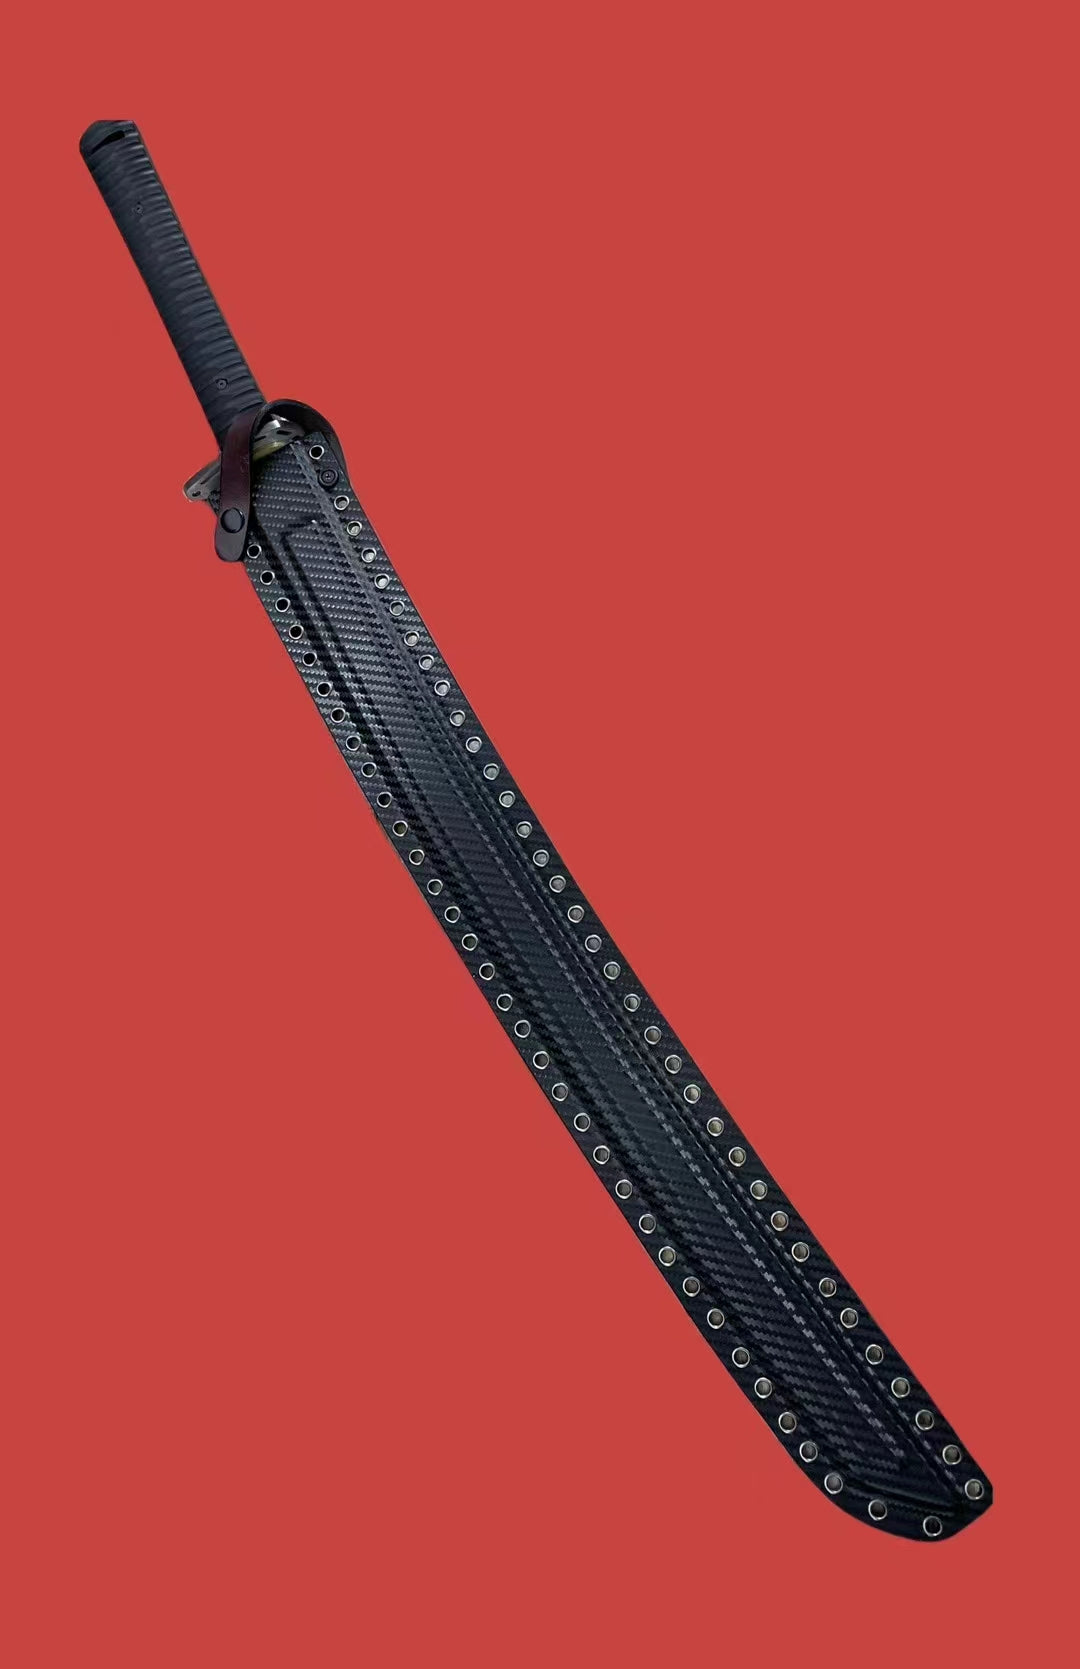 Tactical Great Samurai（1095 Covered with soil and fire burns the blade）katana